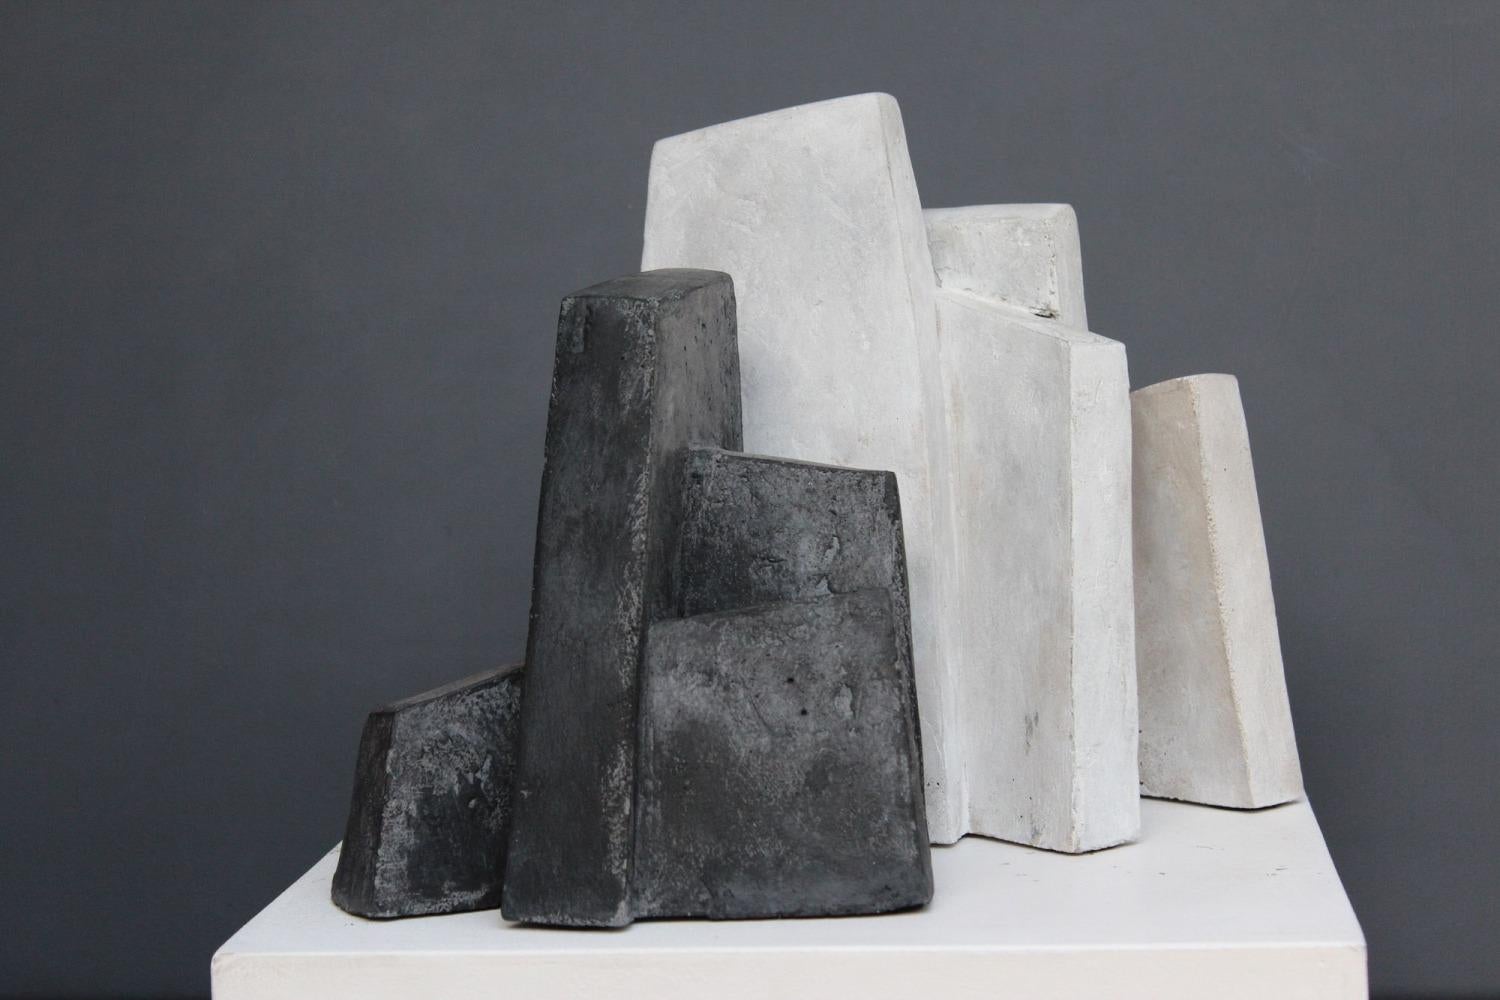 Fragment is a concrete sculpture coloured in the mass by contemporary artist Delphine Brabant, dimensions are 32 × 32 × 22 cm (12.6 × 12.6 × 8.7 in). 
The sculpture is signed and numbered, it is part of a limited edition of 8 editions + 4 artist’s